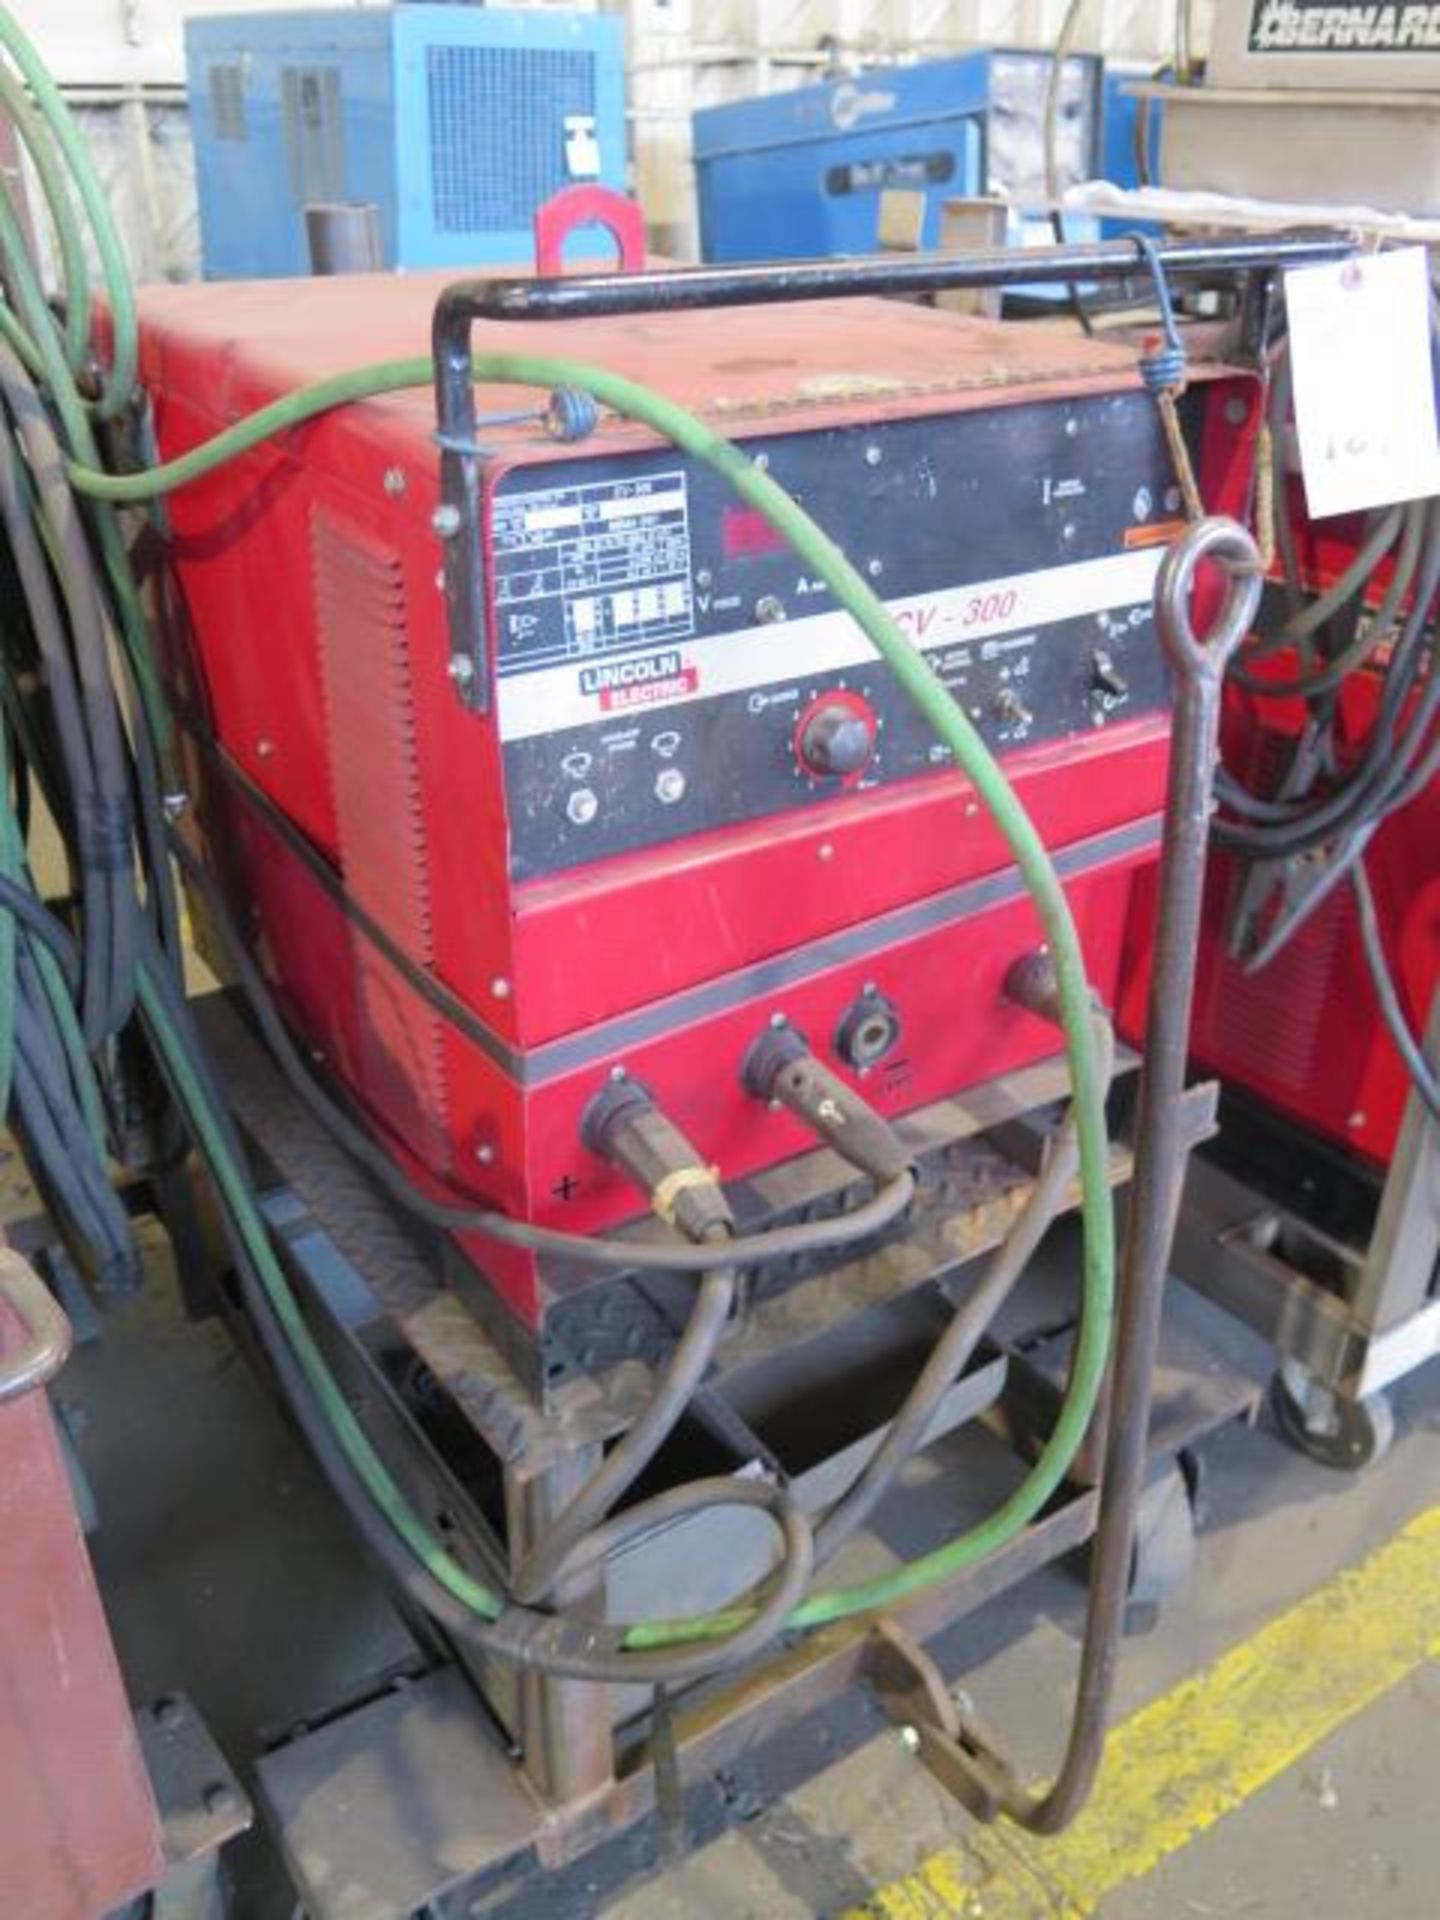 Lincoln CV-300 Arc Welding Power Source w/ Lincoln LF-74 Wire Feeder (SOLD AS-IS - NO WARRANTY) - Image 3 of 8